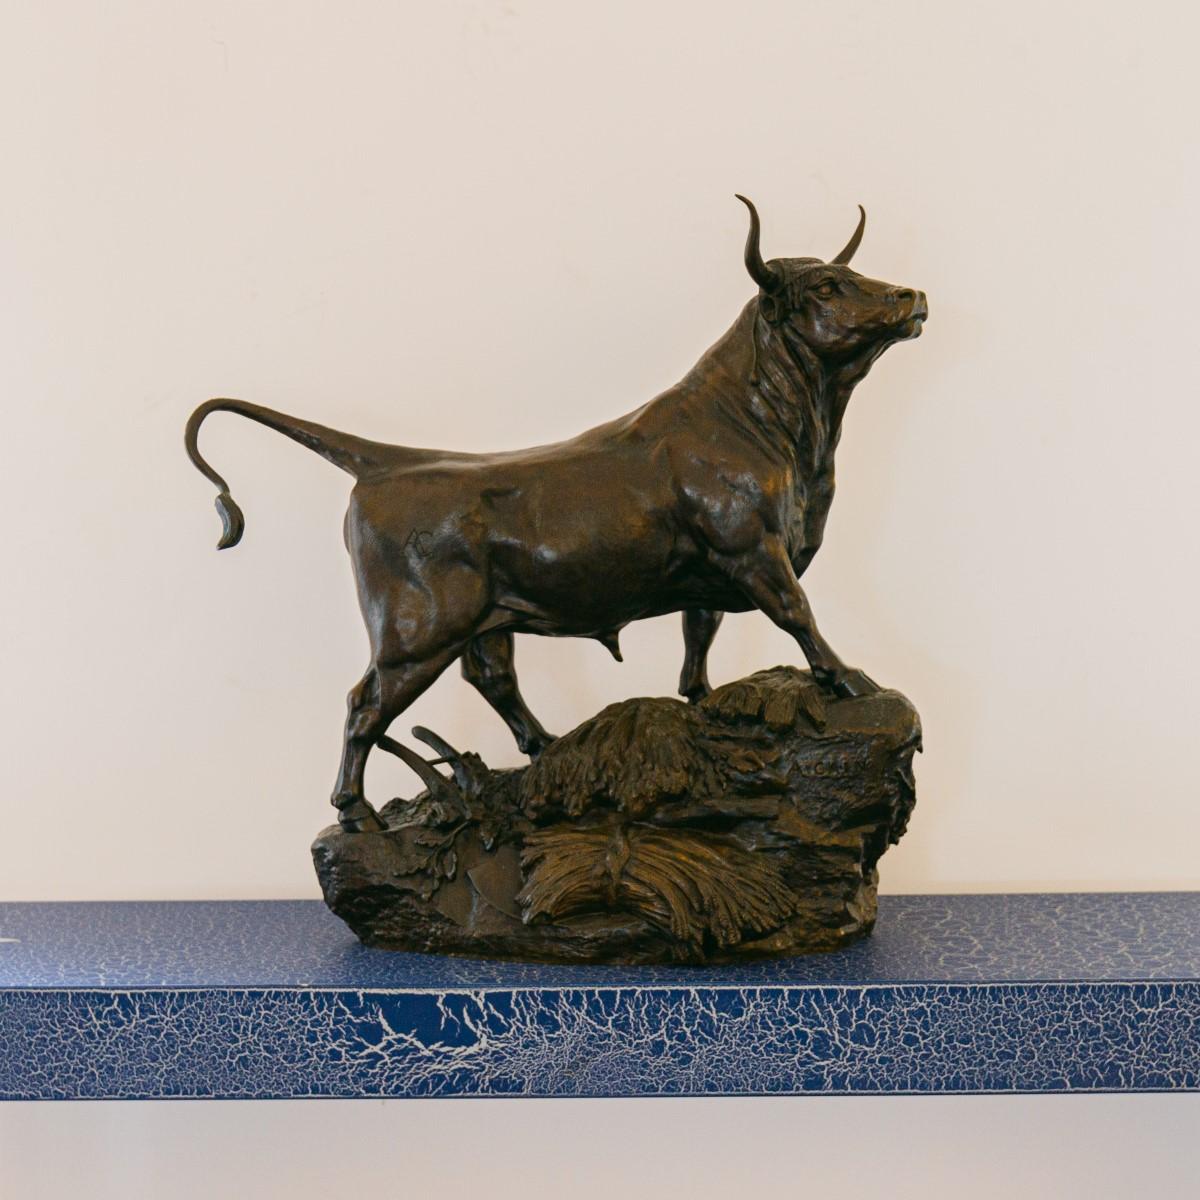 Art Nouveau Late 19th Century French Bronze of a Bull by Auguste Cain